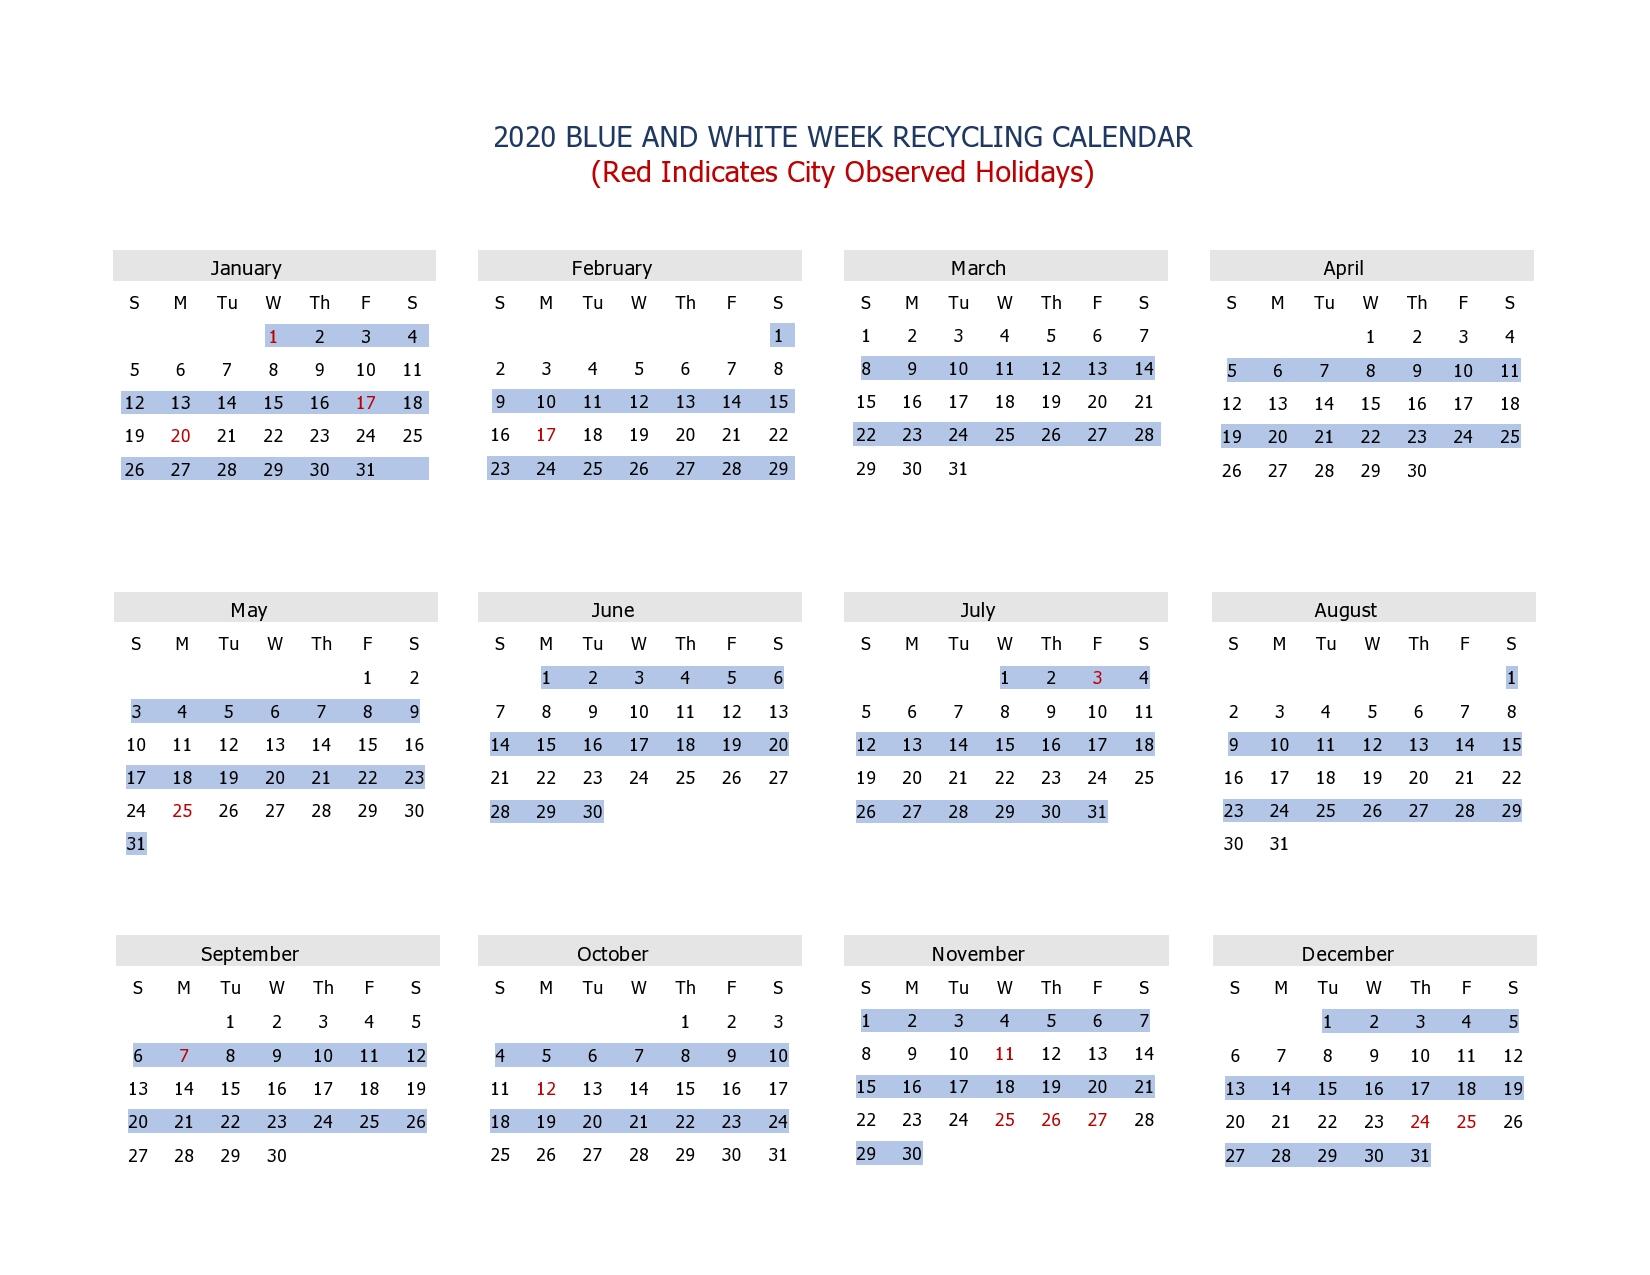 City of Portsmouth 2020 Blue and White Recycling Calendar (City of